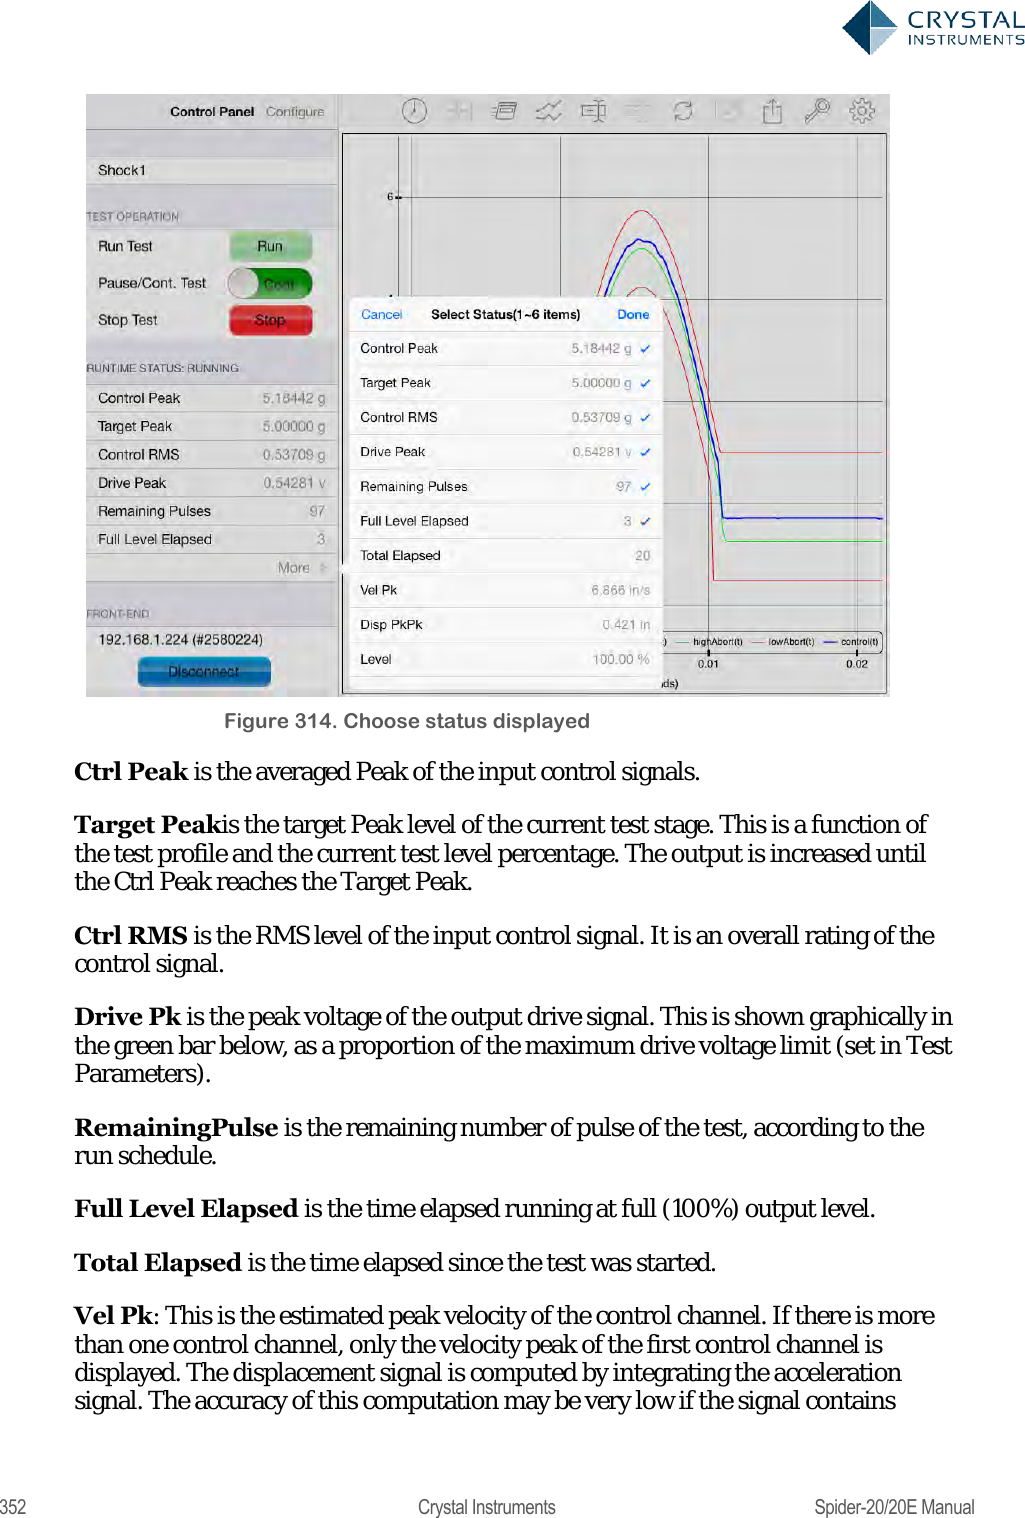  352  Crystal Instruments  Spider-20/20E Manual  Figure 314. Choose status displayed Ctrl Peak is the averaged Peak of the input control signals. Target Peakis the target Peak level of the current test stage. This is a function of the test profile and the current test level percentage. The output is increased until the Ctrl Peak reaches the Target Peak. Ctrl RMS is the RMS level of the input control signal. It is an overall rating of the control signal.  Drive Pk is the peak voltage of the output drive signal. This is shown graphically in the green bar below, as a proportion of the maximum drive voltage limit (set in Test Parameters). RemainingPulse is the remaining number of pulse of the test, according to the run schedule. Full Level Elapsed is the time elapsed running at full (100%) output level. Total Elapsed is the time elapsed since the test was started. Vel Pk: This is the estimated peak velocity of the control channel. If there is more than one control channel, only the velocity peak of the first control channel is displayed. The displacement signal is computed by integrating the acceleration signal. The accuracy of this computation may be very low if the signal contains 